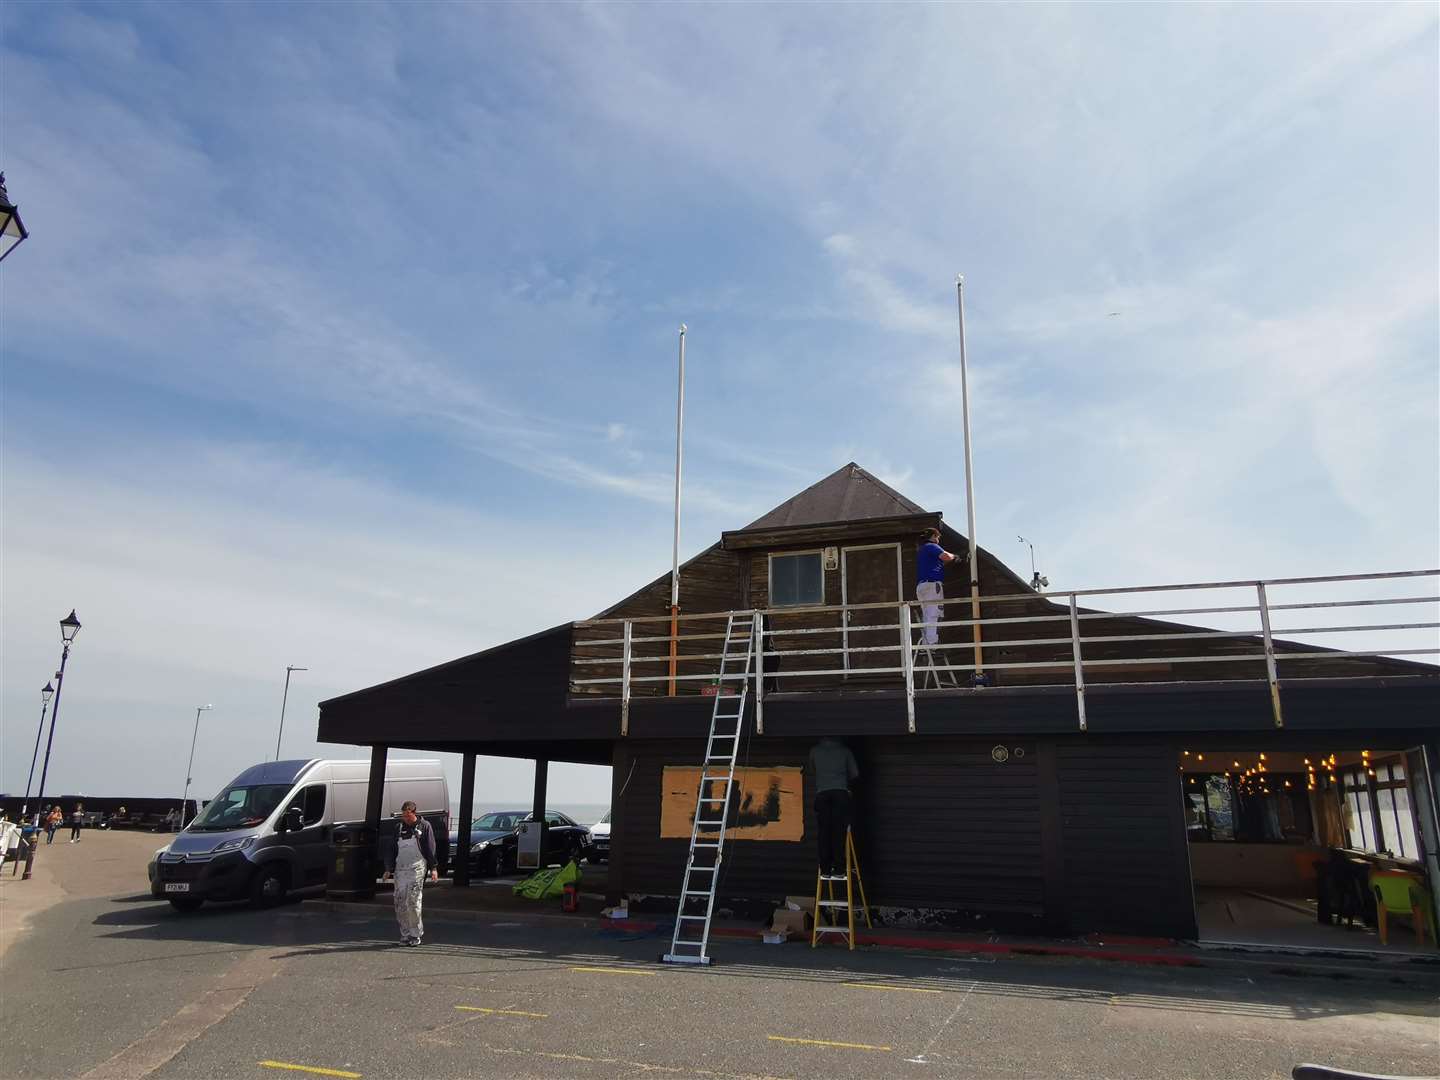 Work is underway to transform the building into Jetty Broadstairs